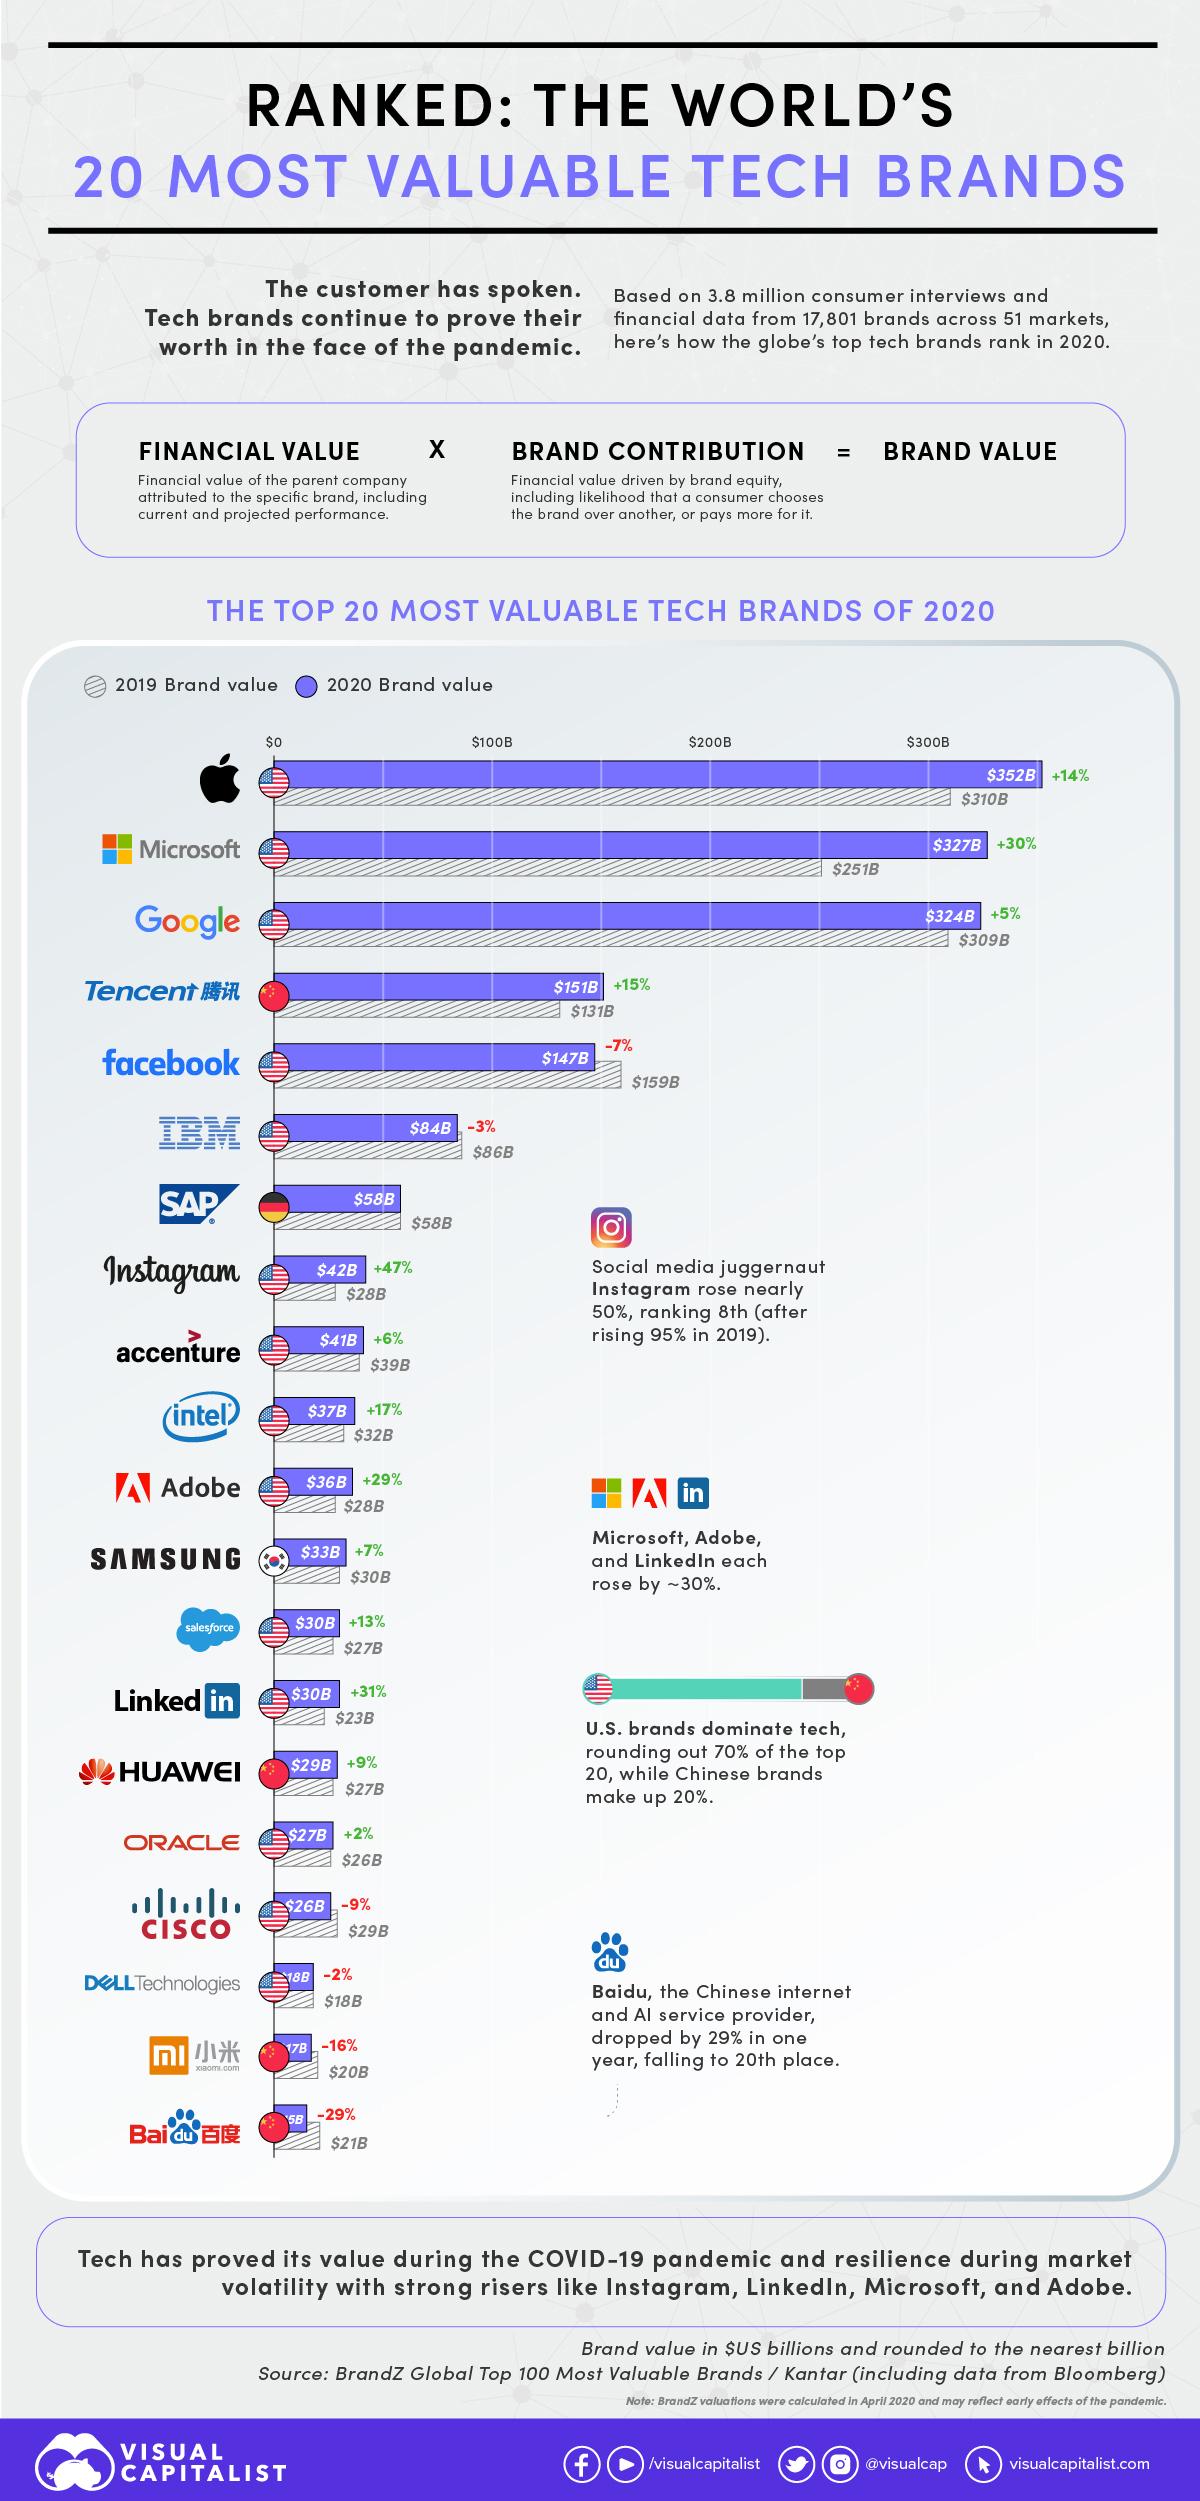 Ranked: The World's 20 Biggest Tech Giants, by Brand Value